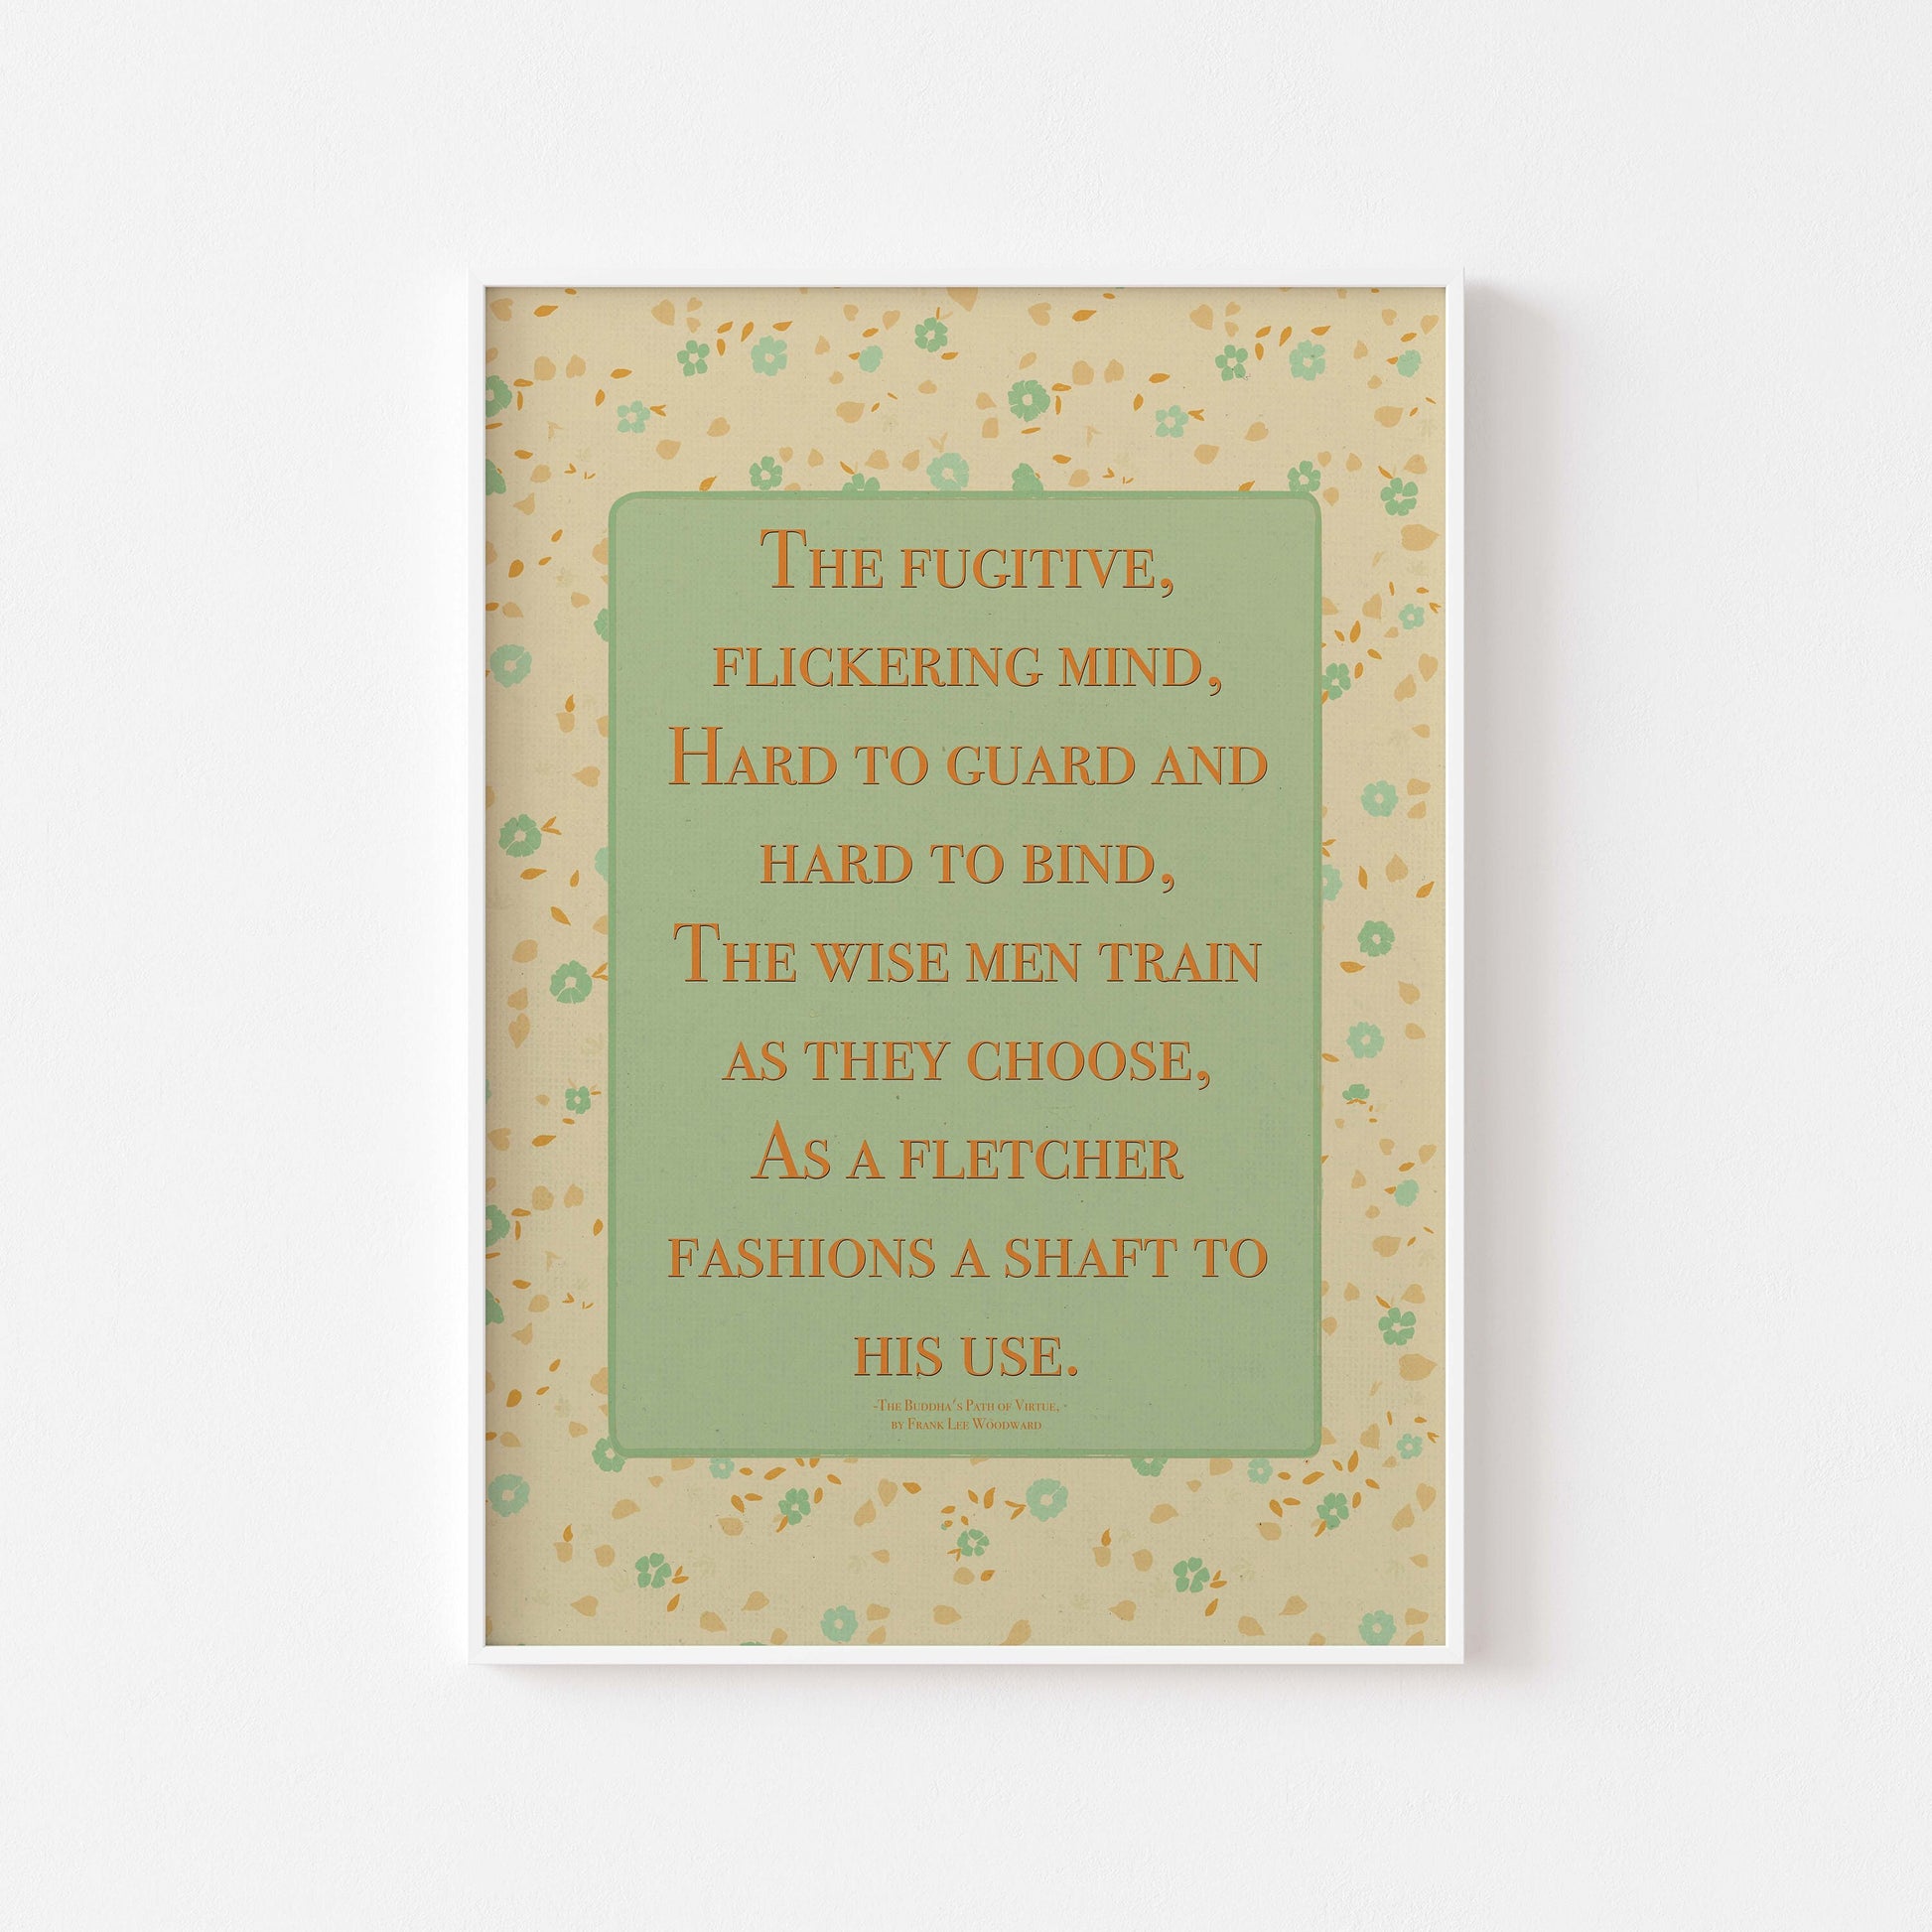 Dhammapada quote on mind poster in pastel colors with floral design in white frame mockup